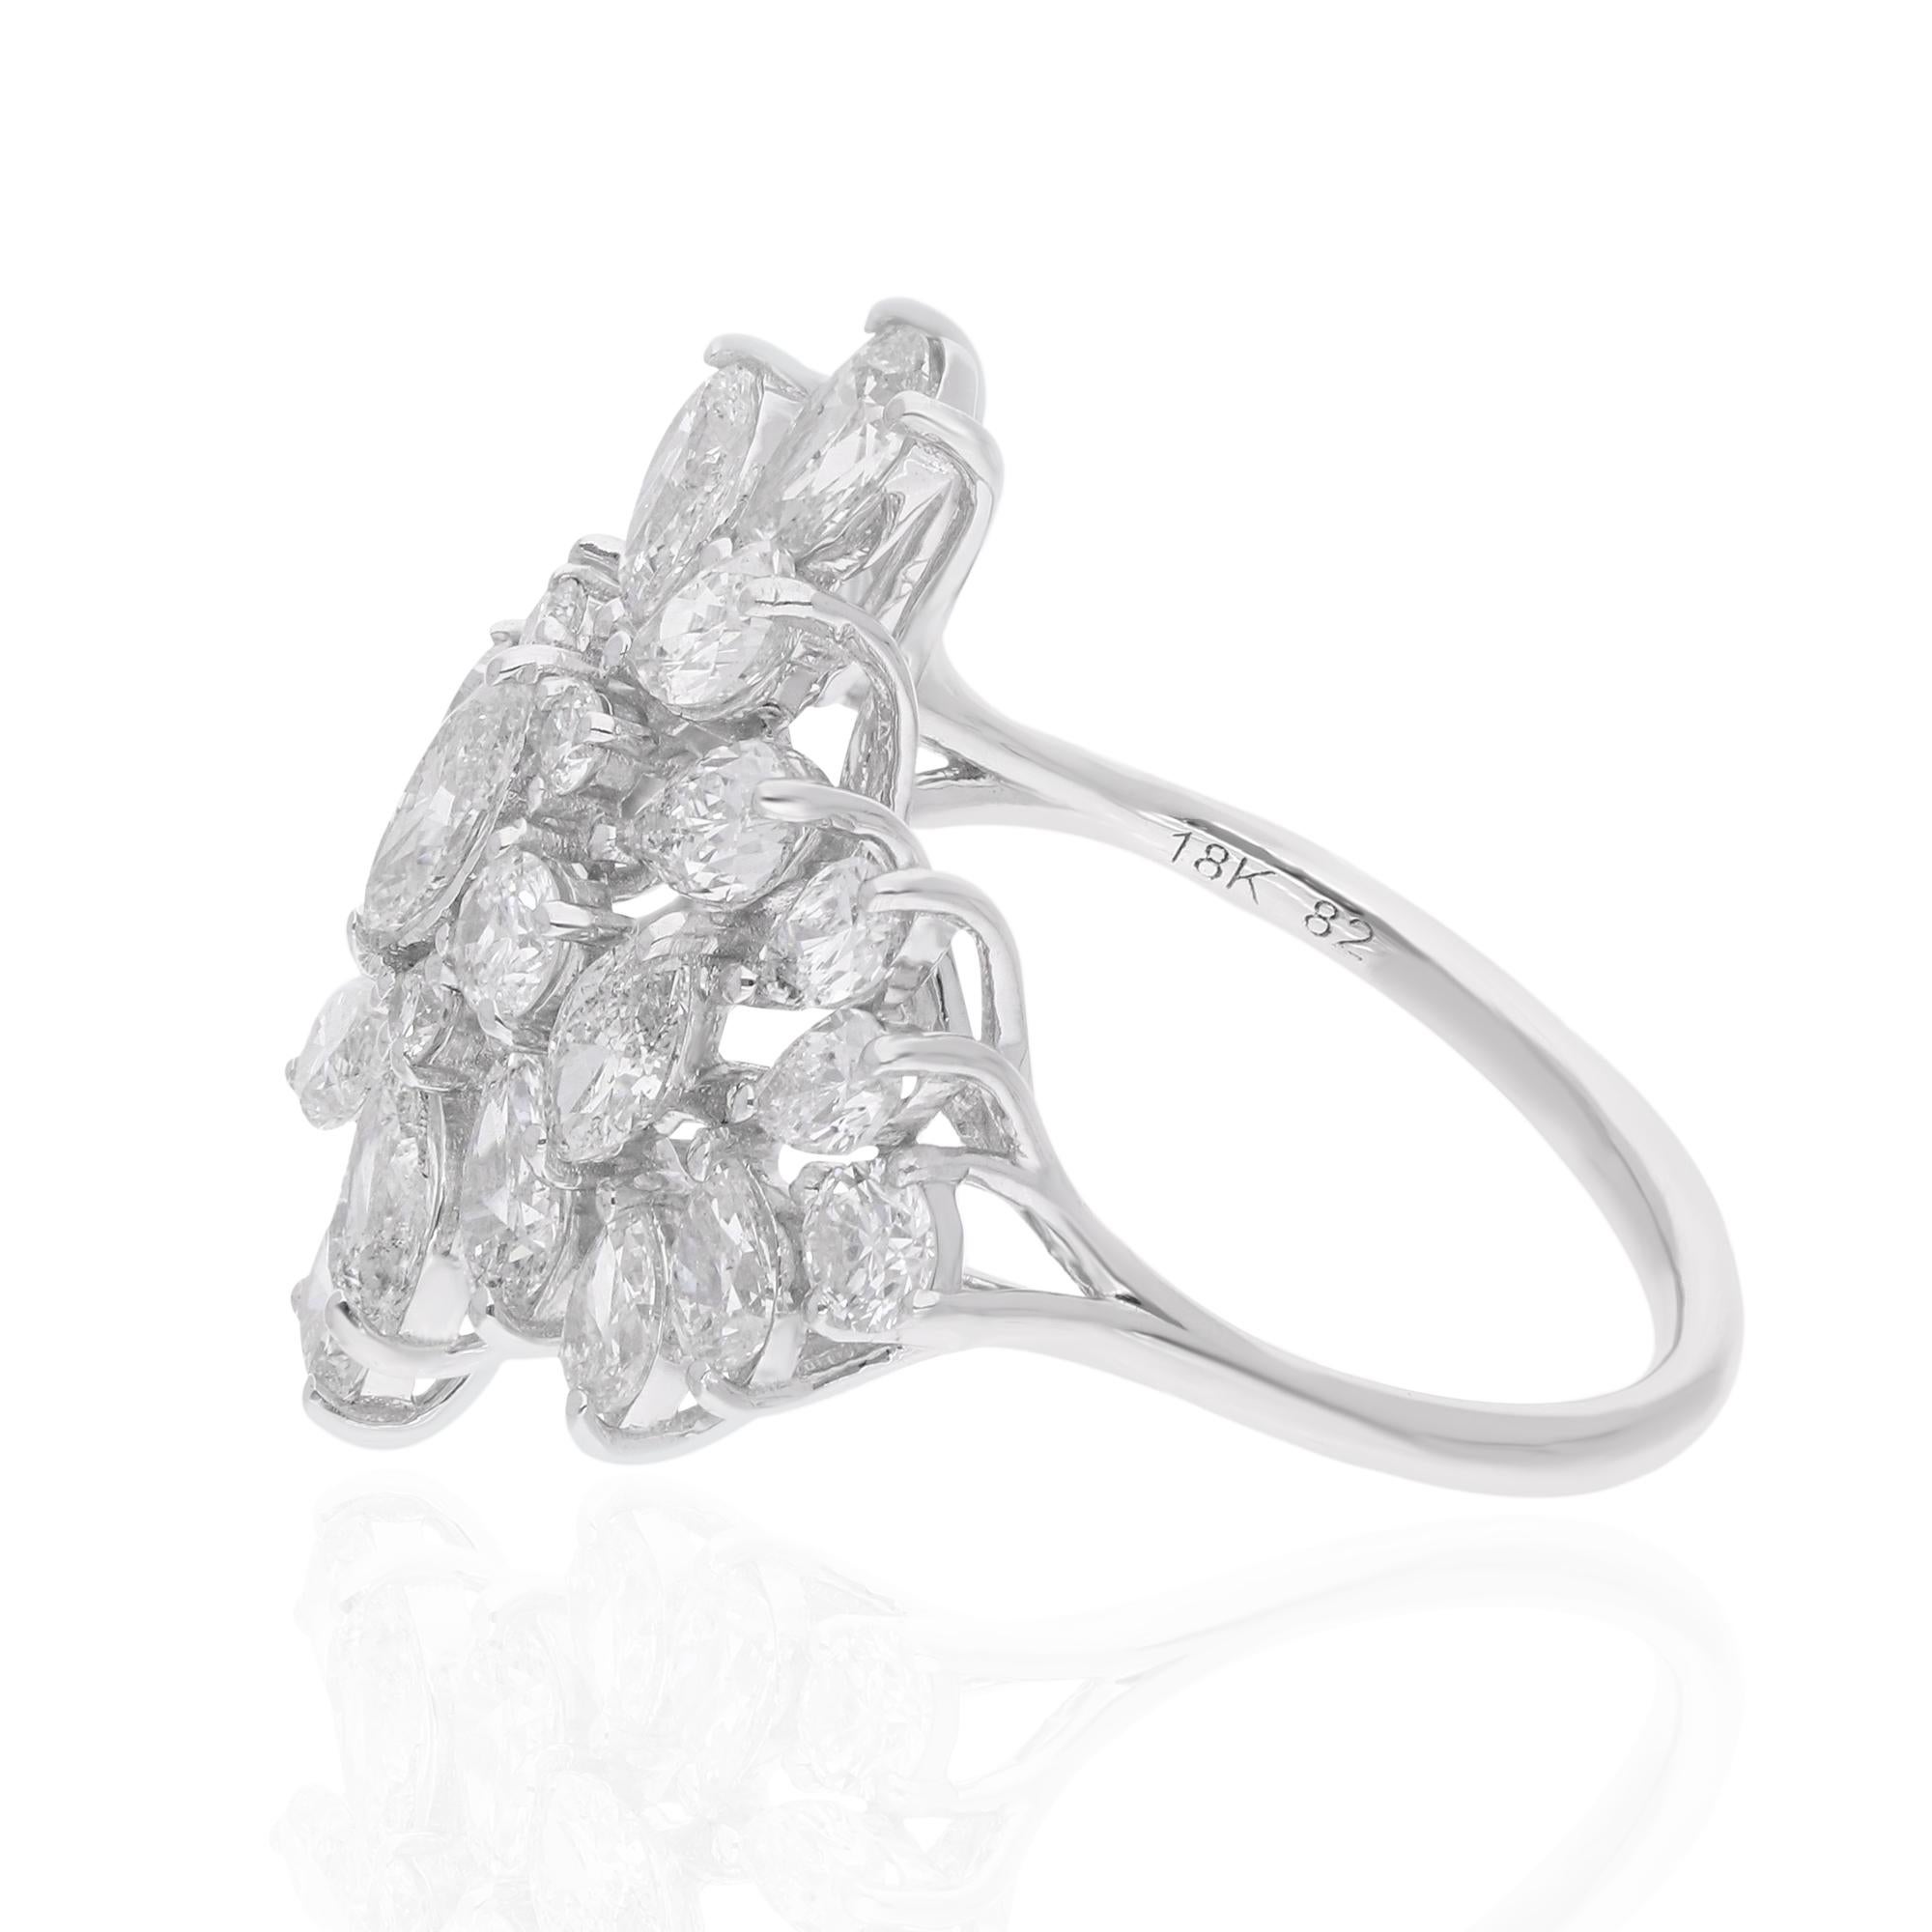 The 14 karat white gold setting provides the perfect backdrop for the diamonds, enhancing their natural beauty while adding a touch of understated elegance to the design. The cool, silvery tones of the white gold complement the brilliance of the